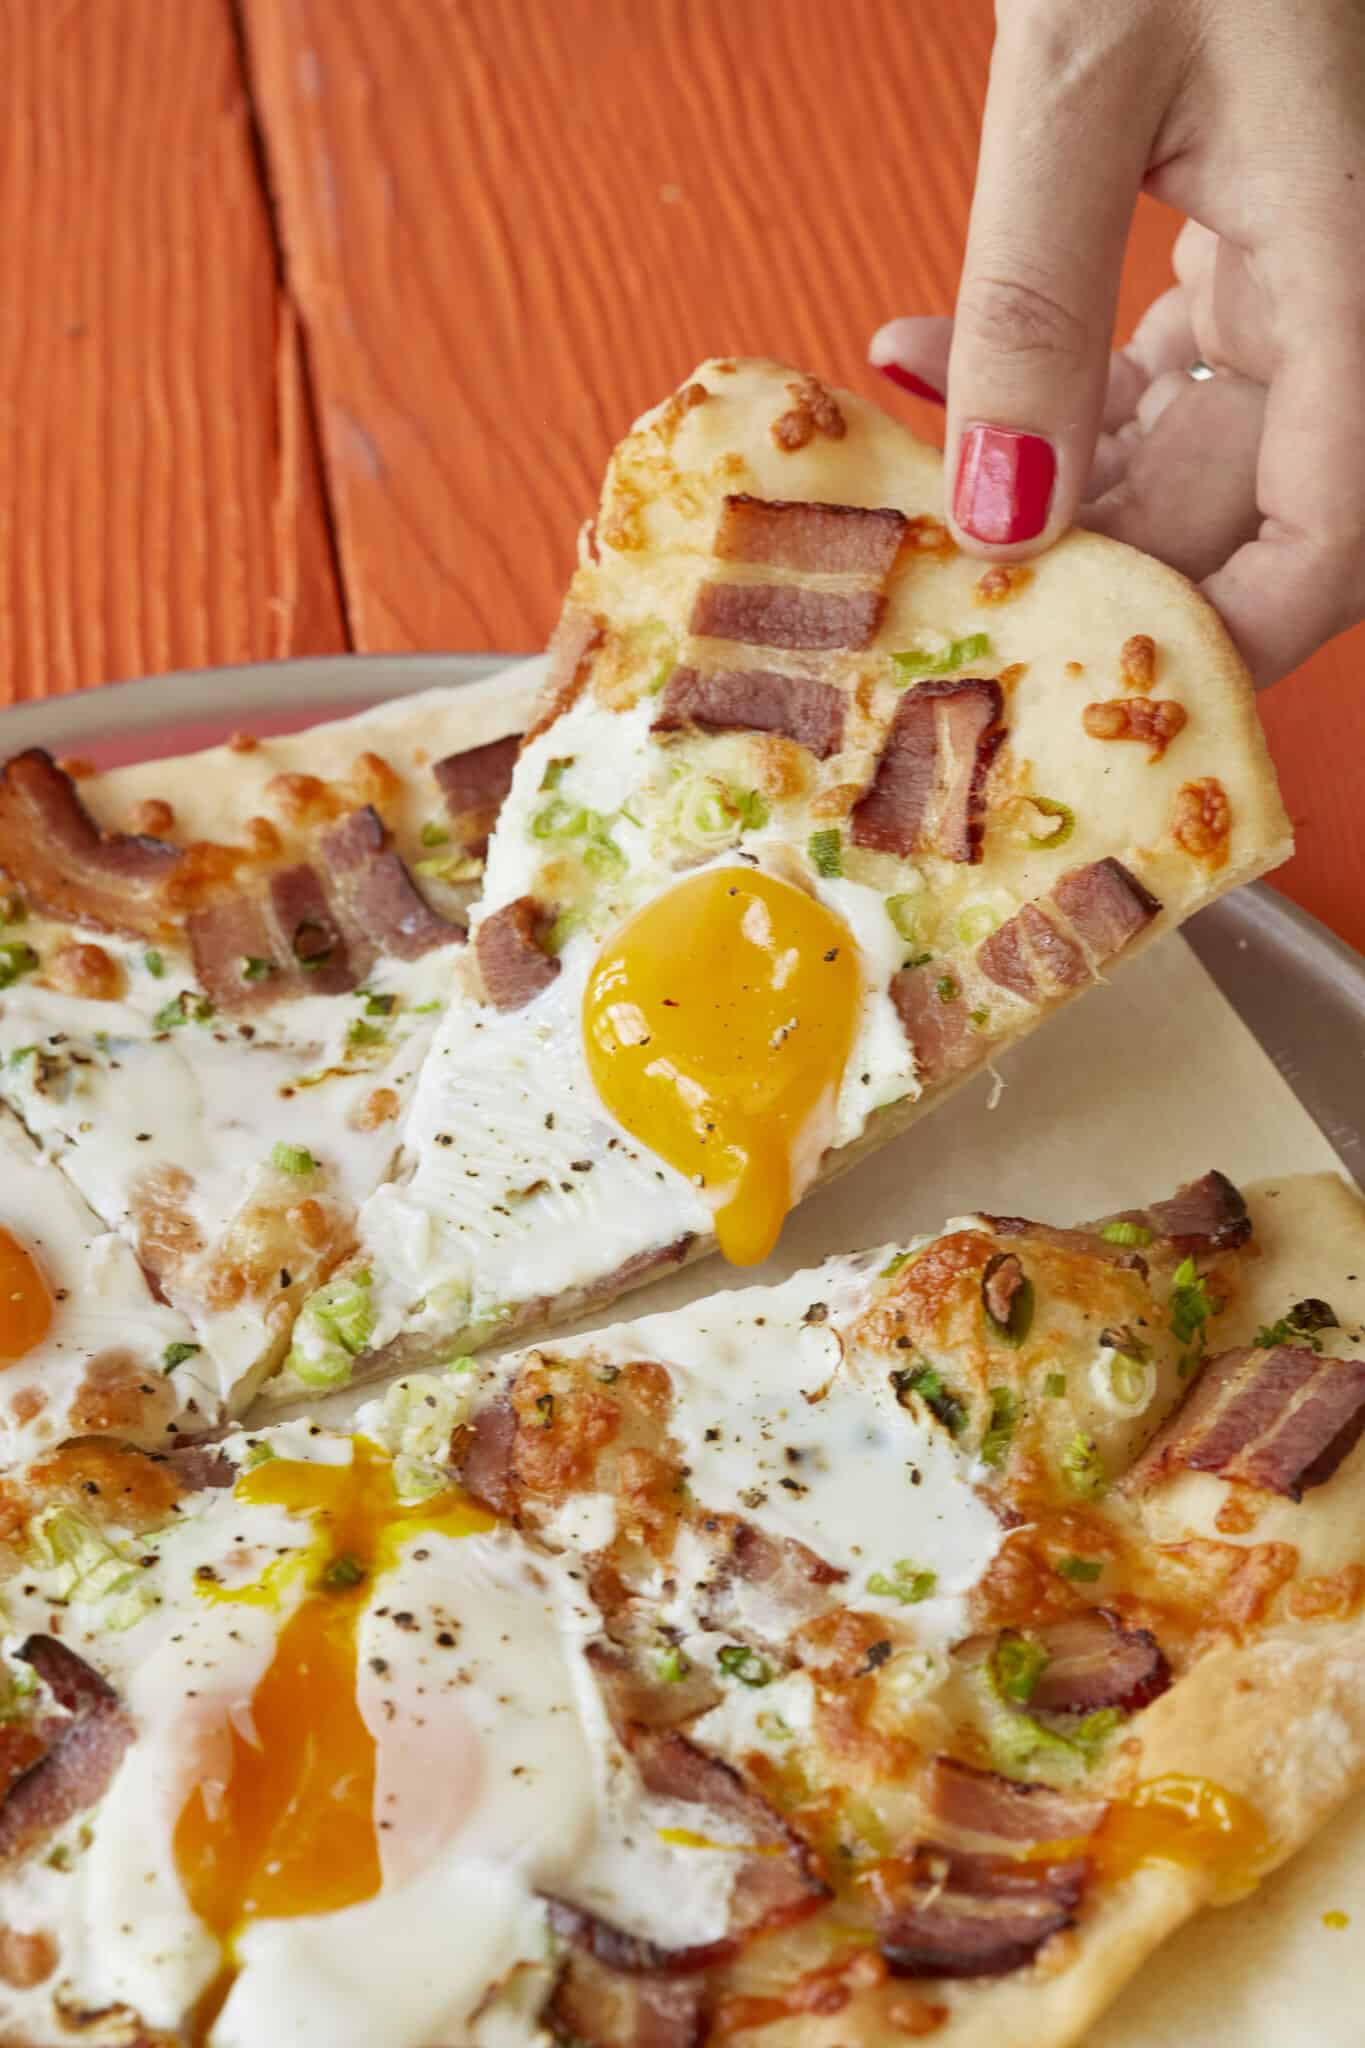 Wholesome breakfast pizza has golden and crispy crust, with smoky bacon, green onions, and sunny-side-up eggs bringing layers of savory flavor. It's sliced and one slice is being lifted from the pan. 